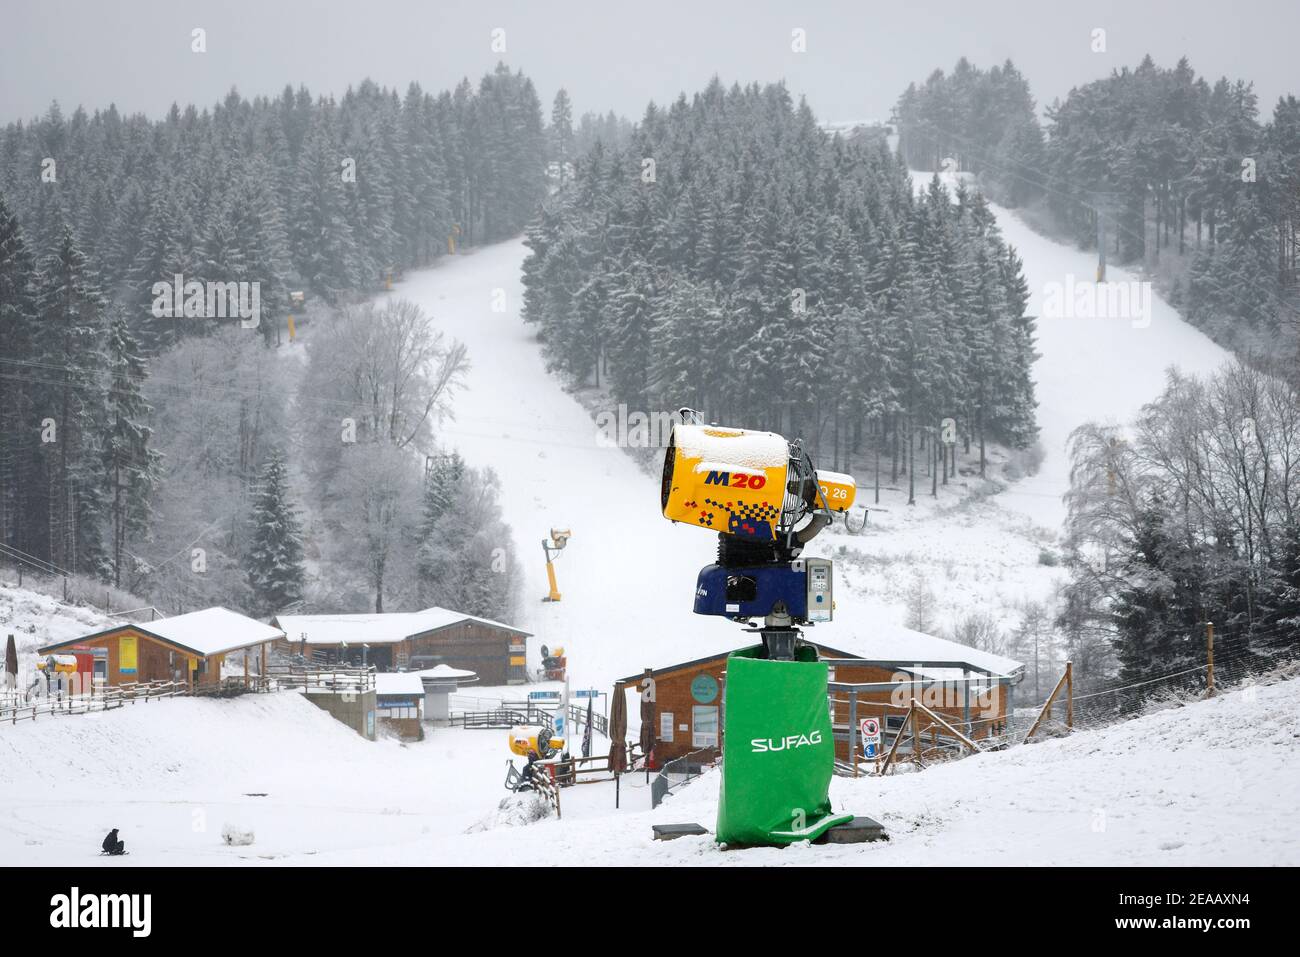 December 07, 2020, Winterberg, Sauerland, North Rhine-Westphalia, Germany, Ski carousel, no winter sports in Winterberg in times of the corona crisis during the second part of the lockdown, ski lifts remain closed in accordance with the new Corona Protection Ordinance in NRW. 00X201207D011CARO Stock Photo